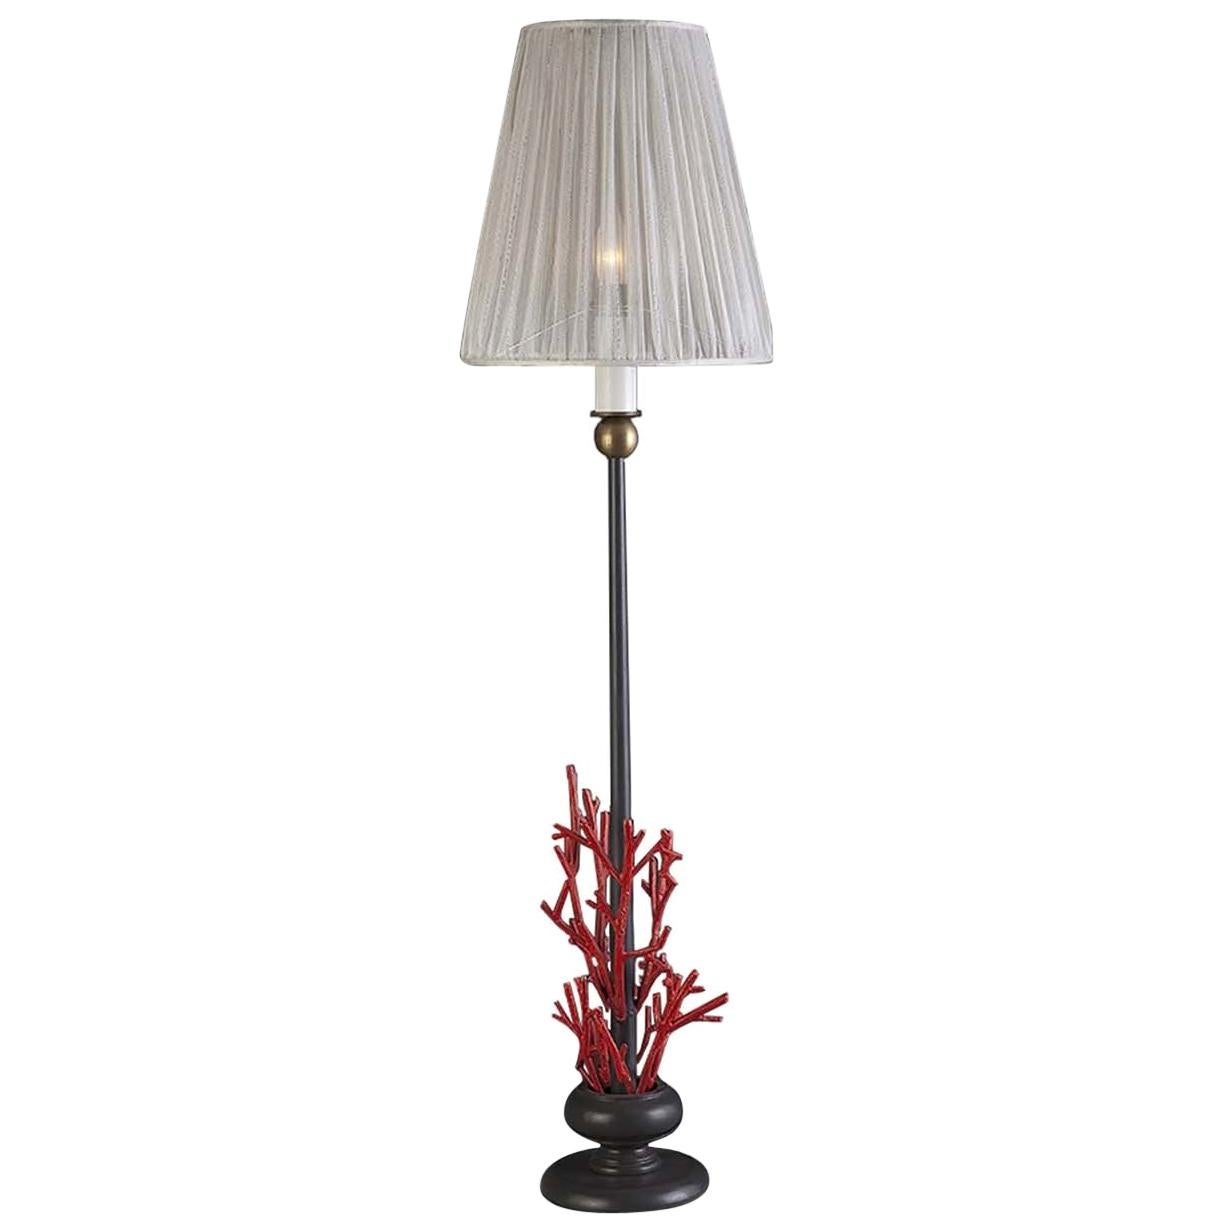 Coralli Table Lamp For Sale